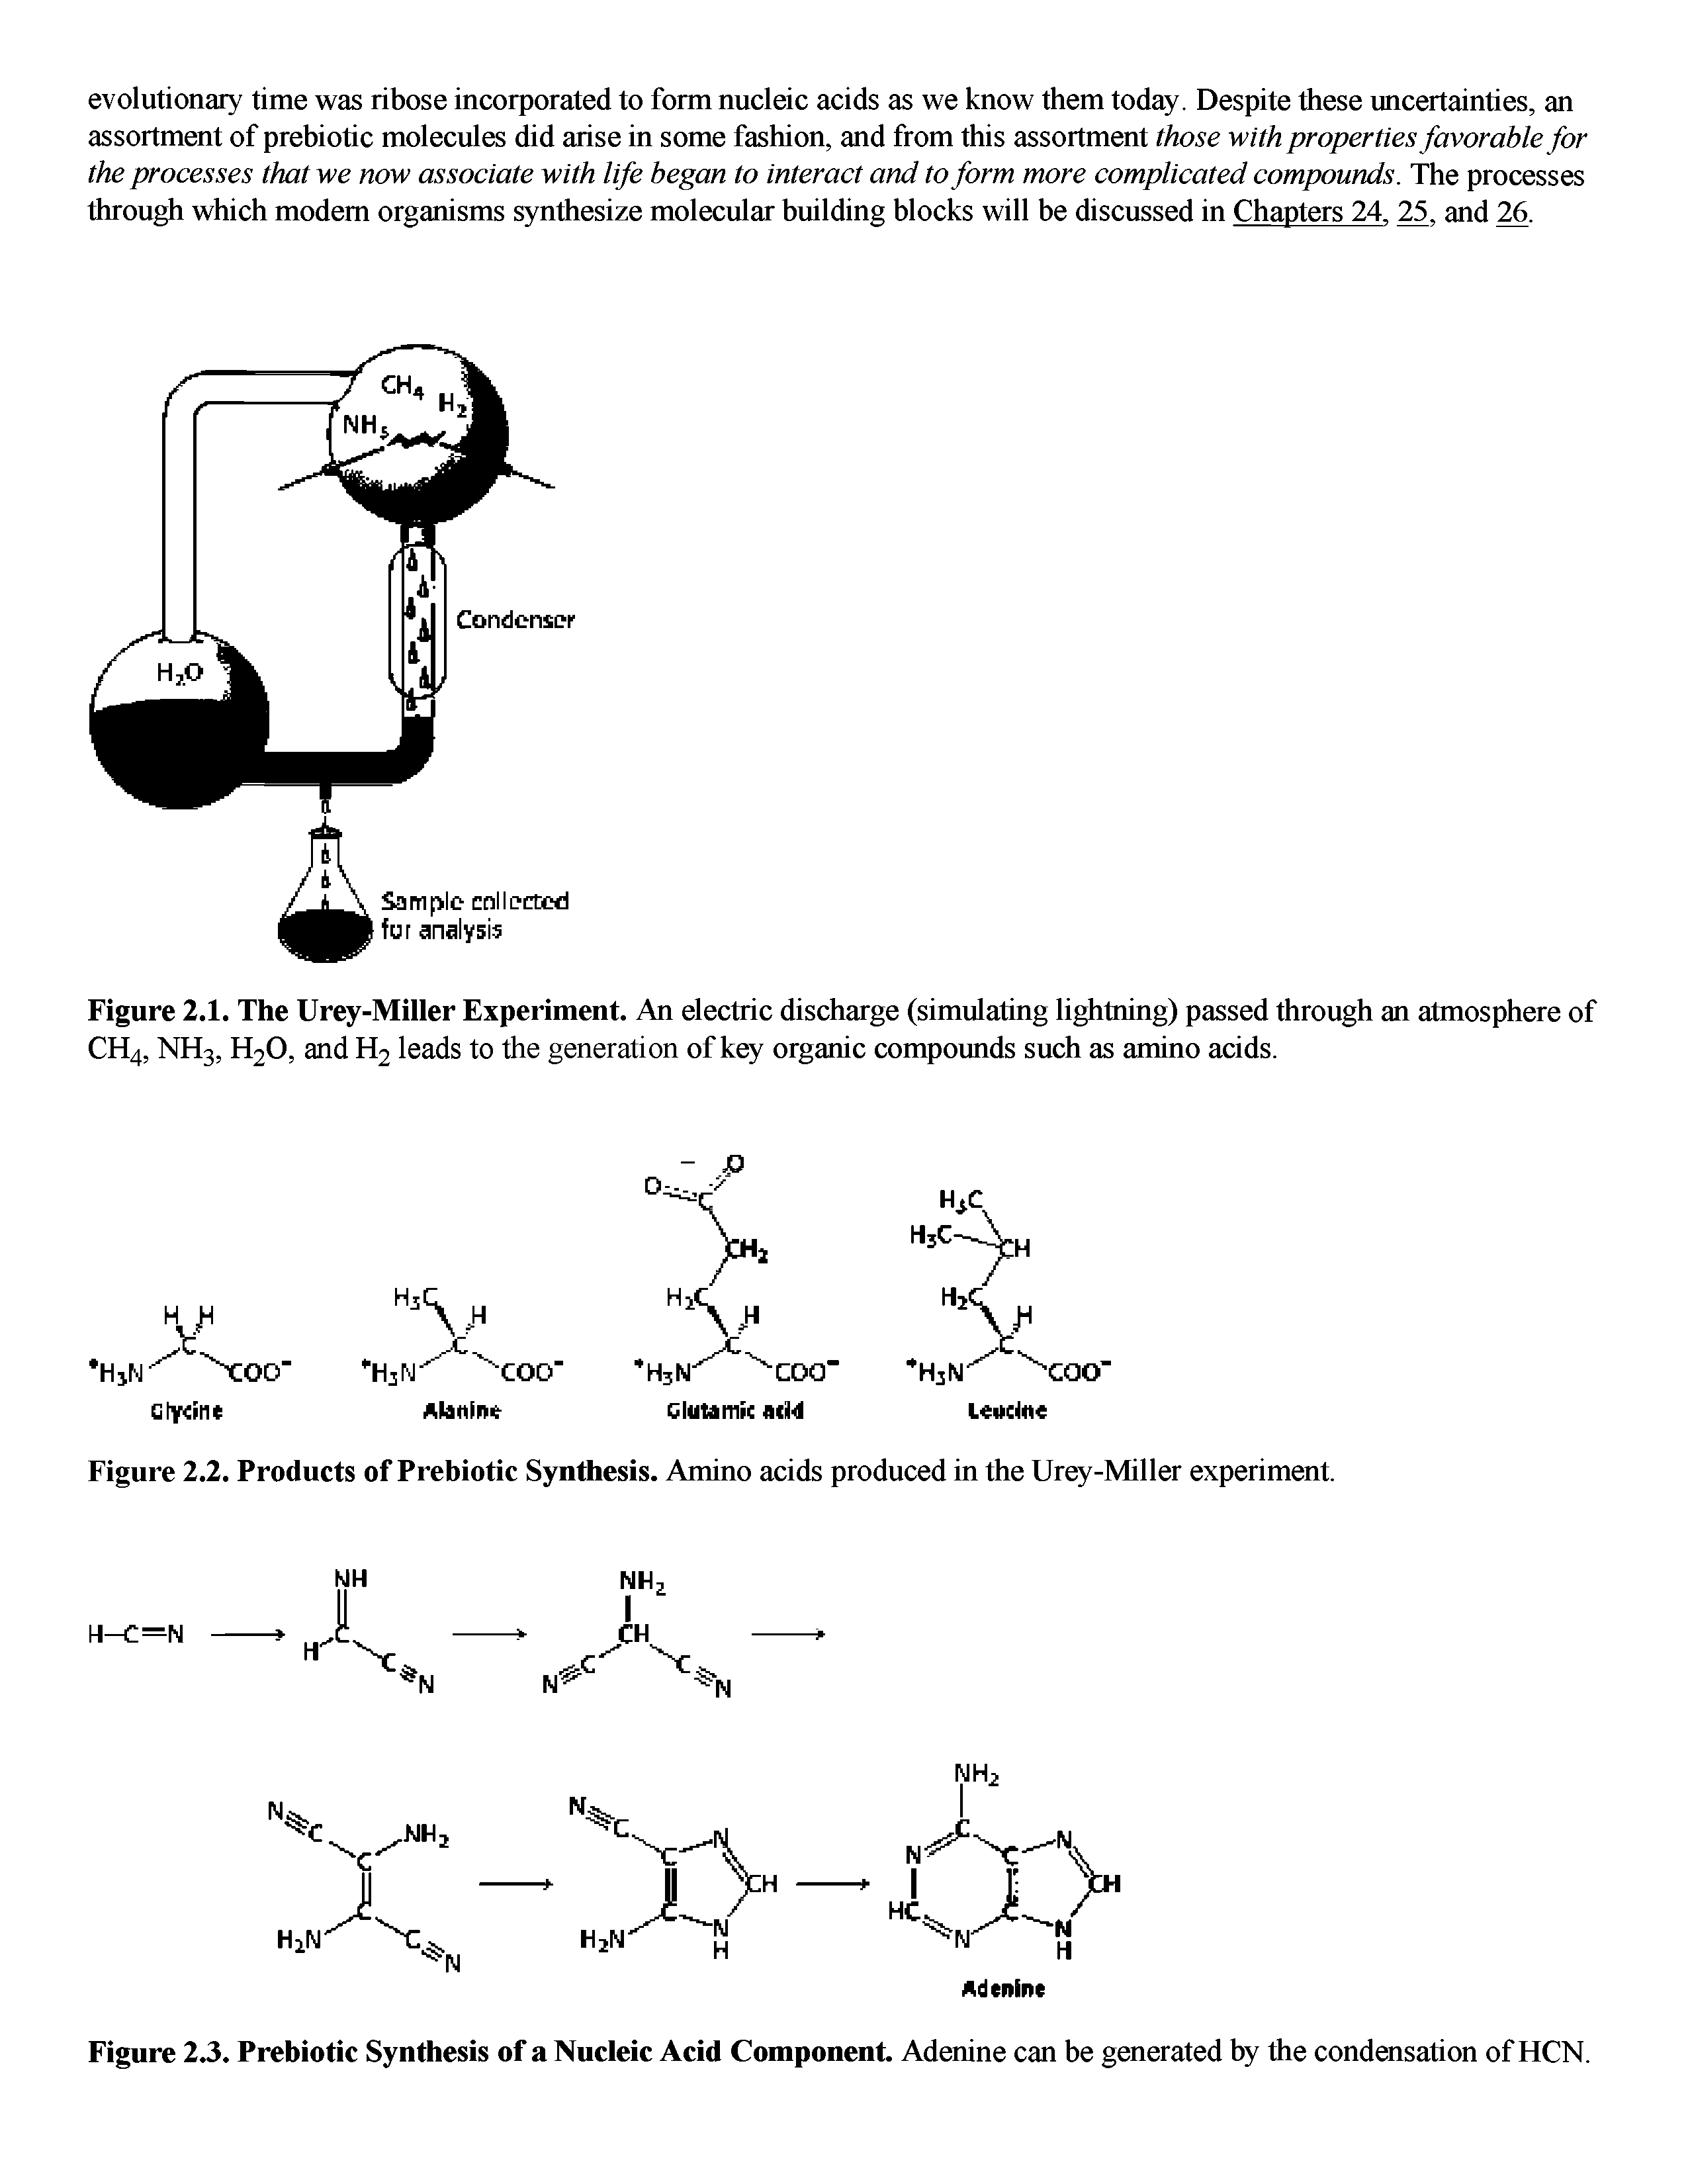 Figure 2.2. Products of Prebiotic Synthesis. Amino acids produced in the Urey-Miller experiment.